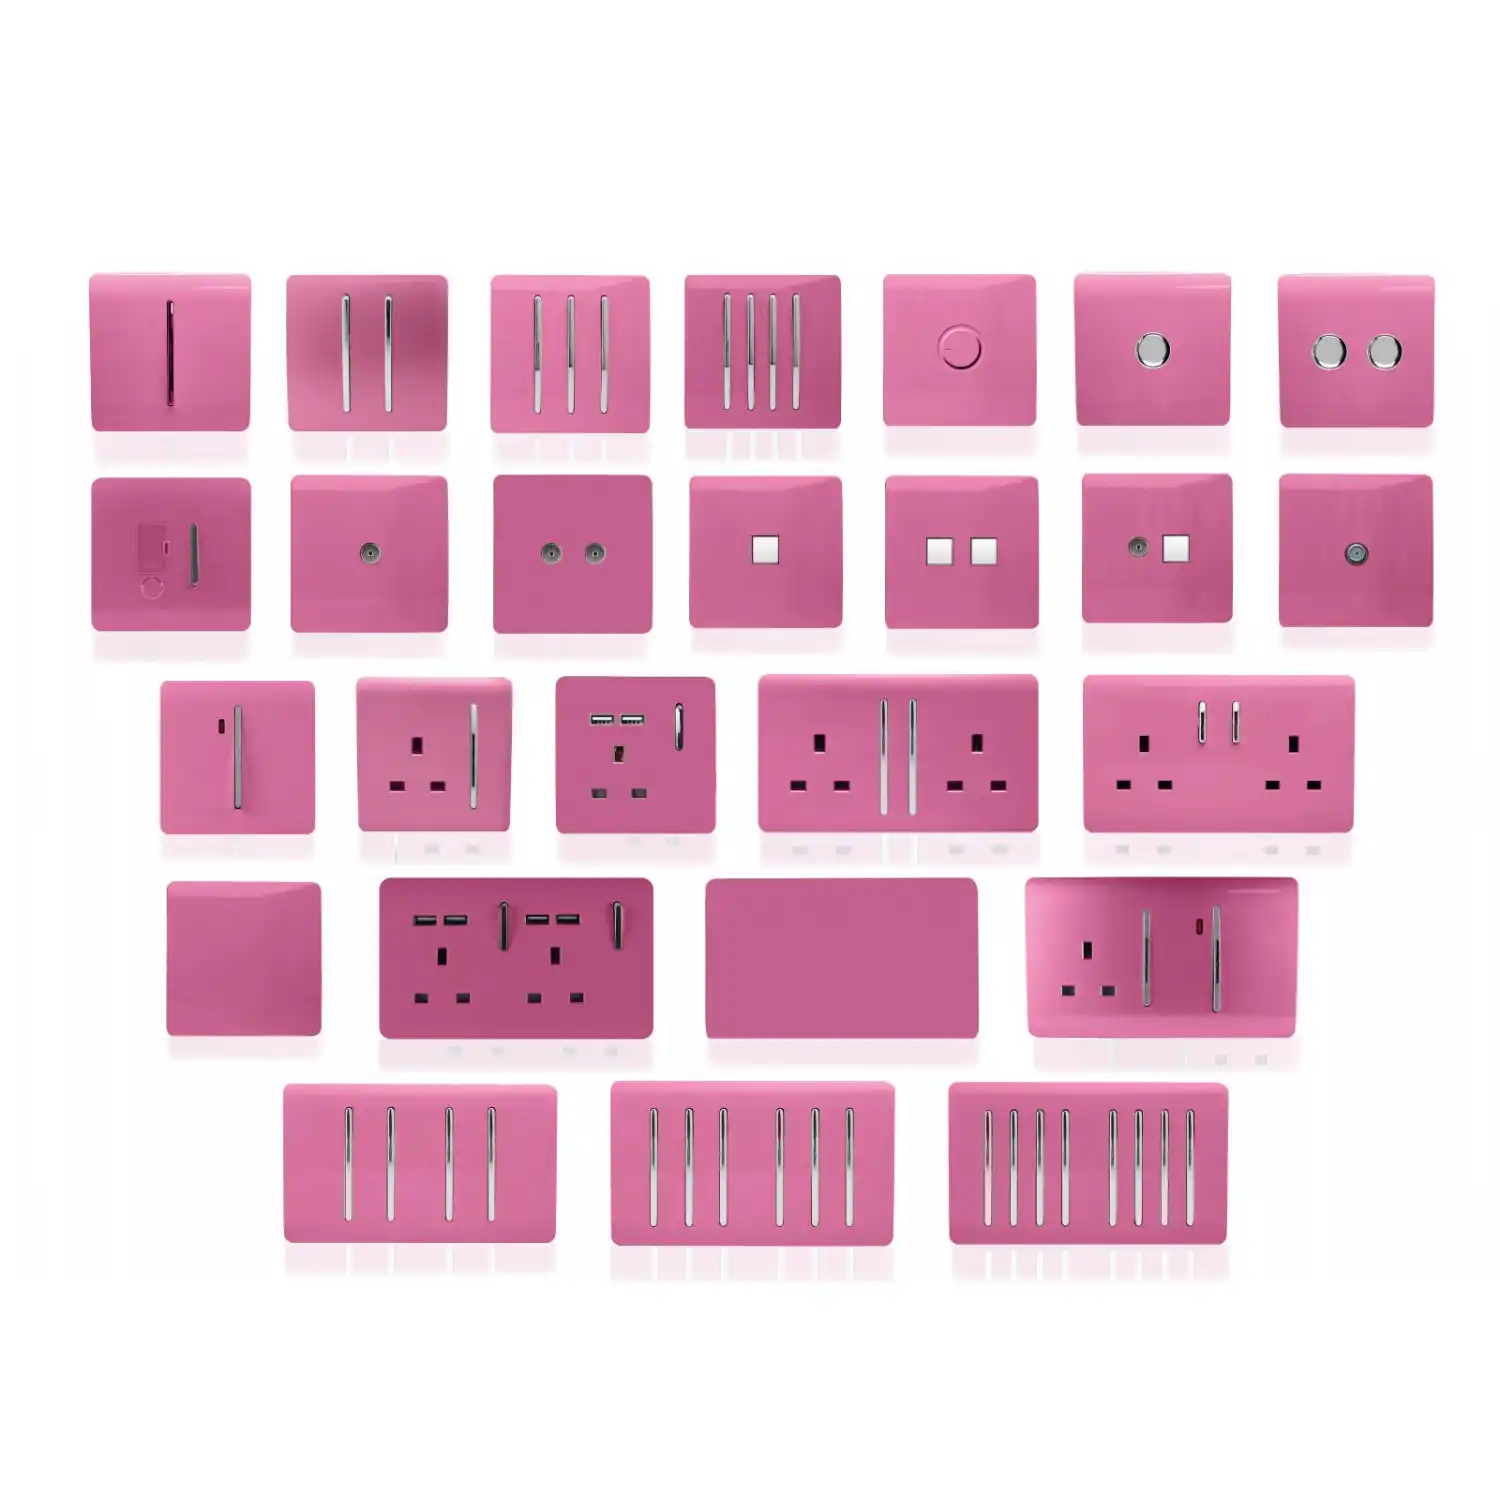 Trendi, Artistic Modern 2 Gang 2 Way LED Dimmer Switch 5 150W LED 120W Tungsten Per Dimmer, Pink Finish, (35mm Back Box Required), 5yrs Warranty